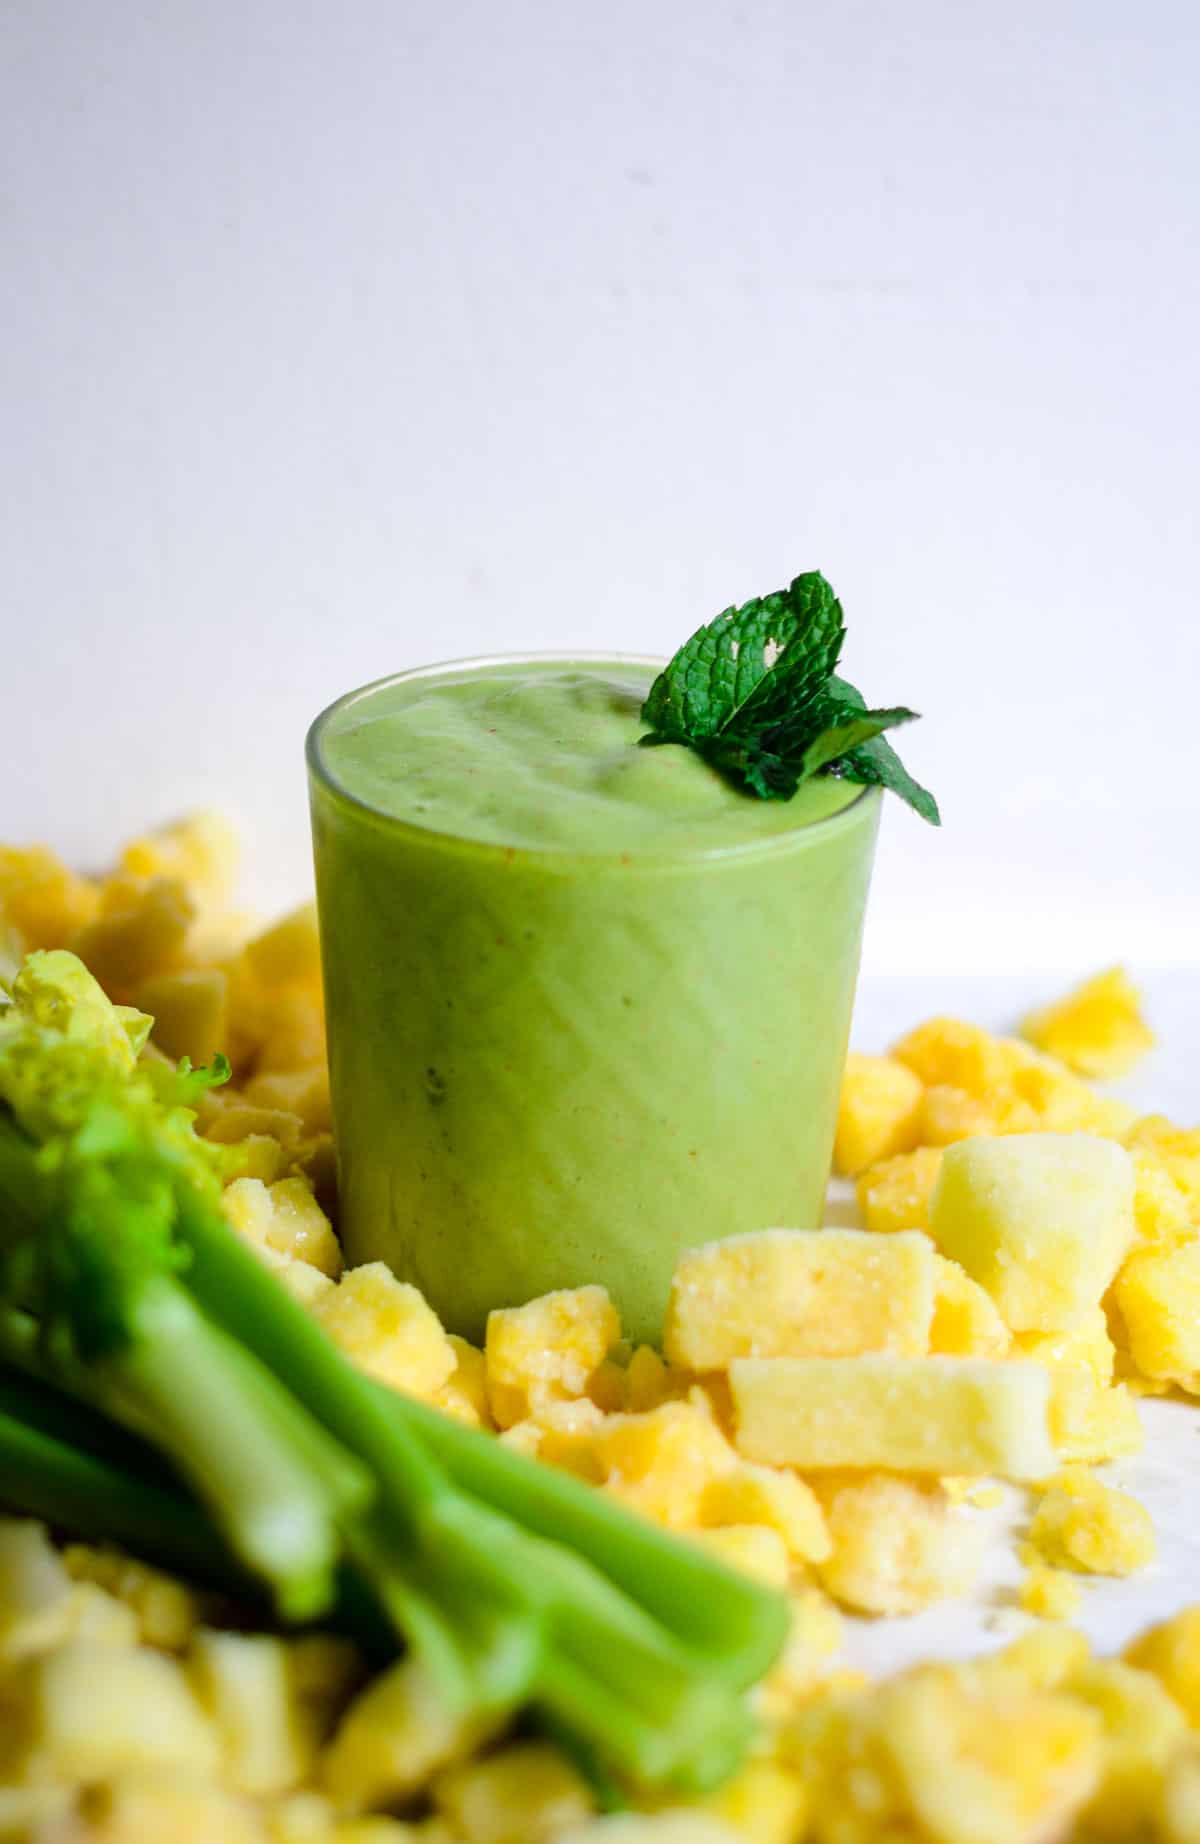 Green smoothie in a glass cup, with mint coming out of it, with frozen pineapple and fresh celery stalks beside it.